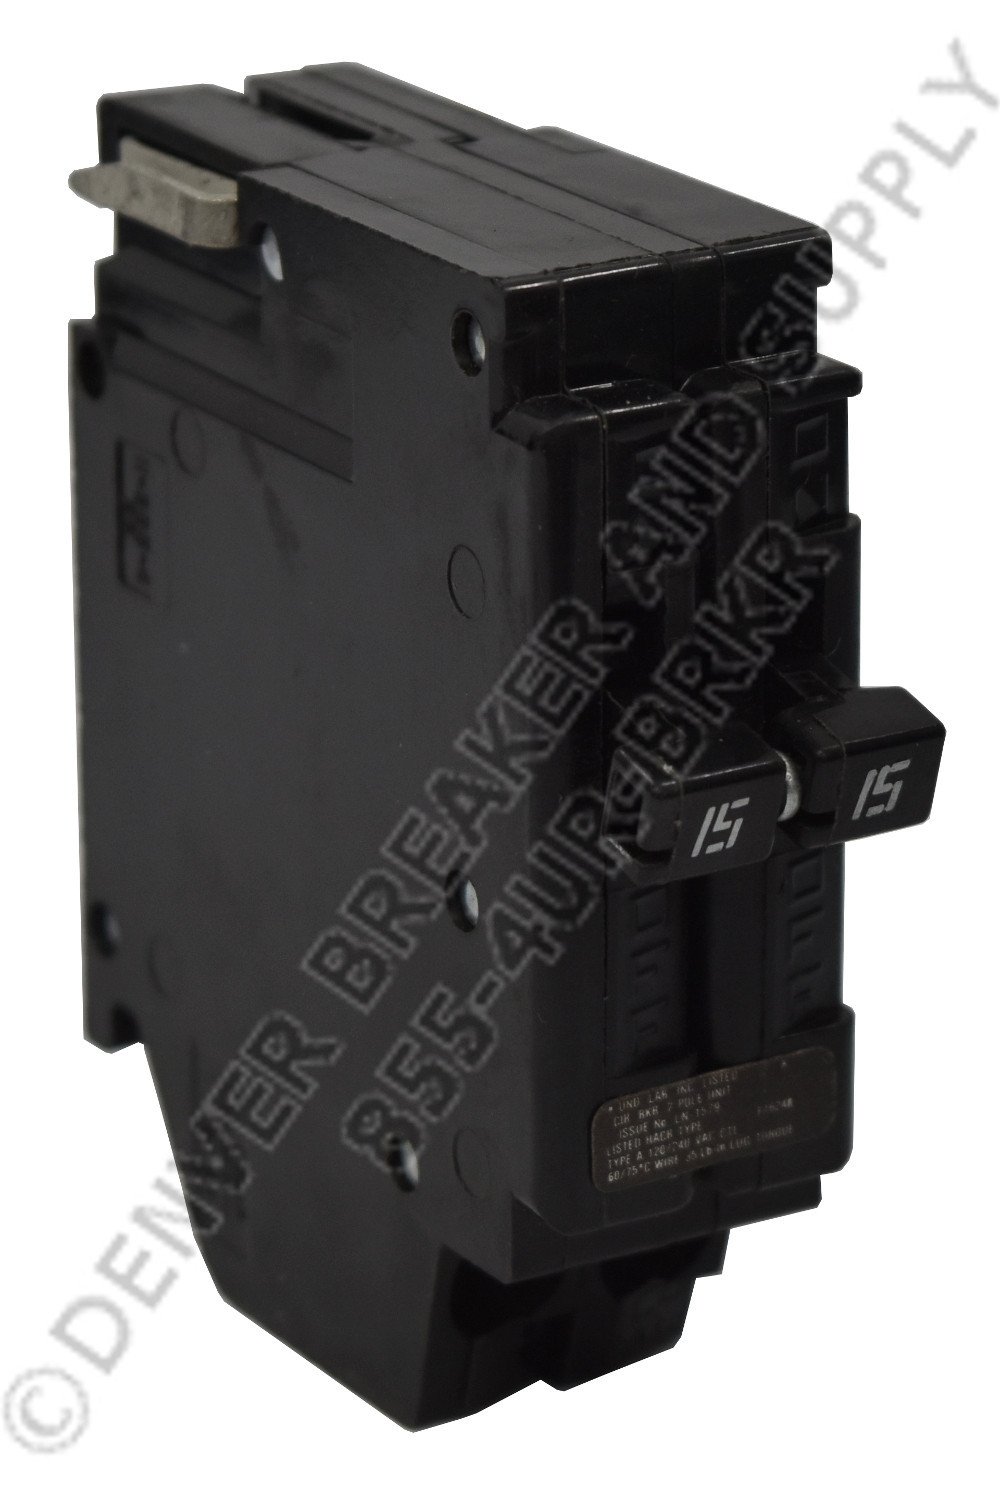 Crousehinds A250 Circuit Breaker